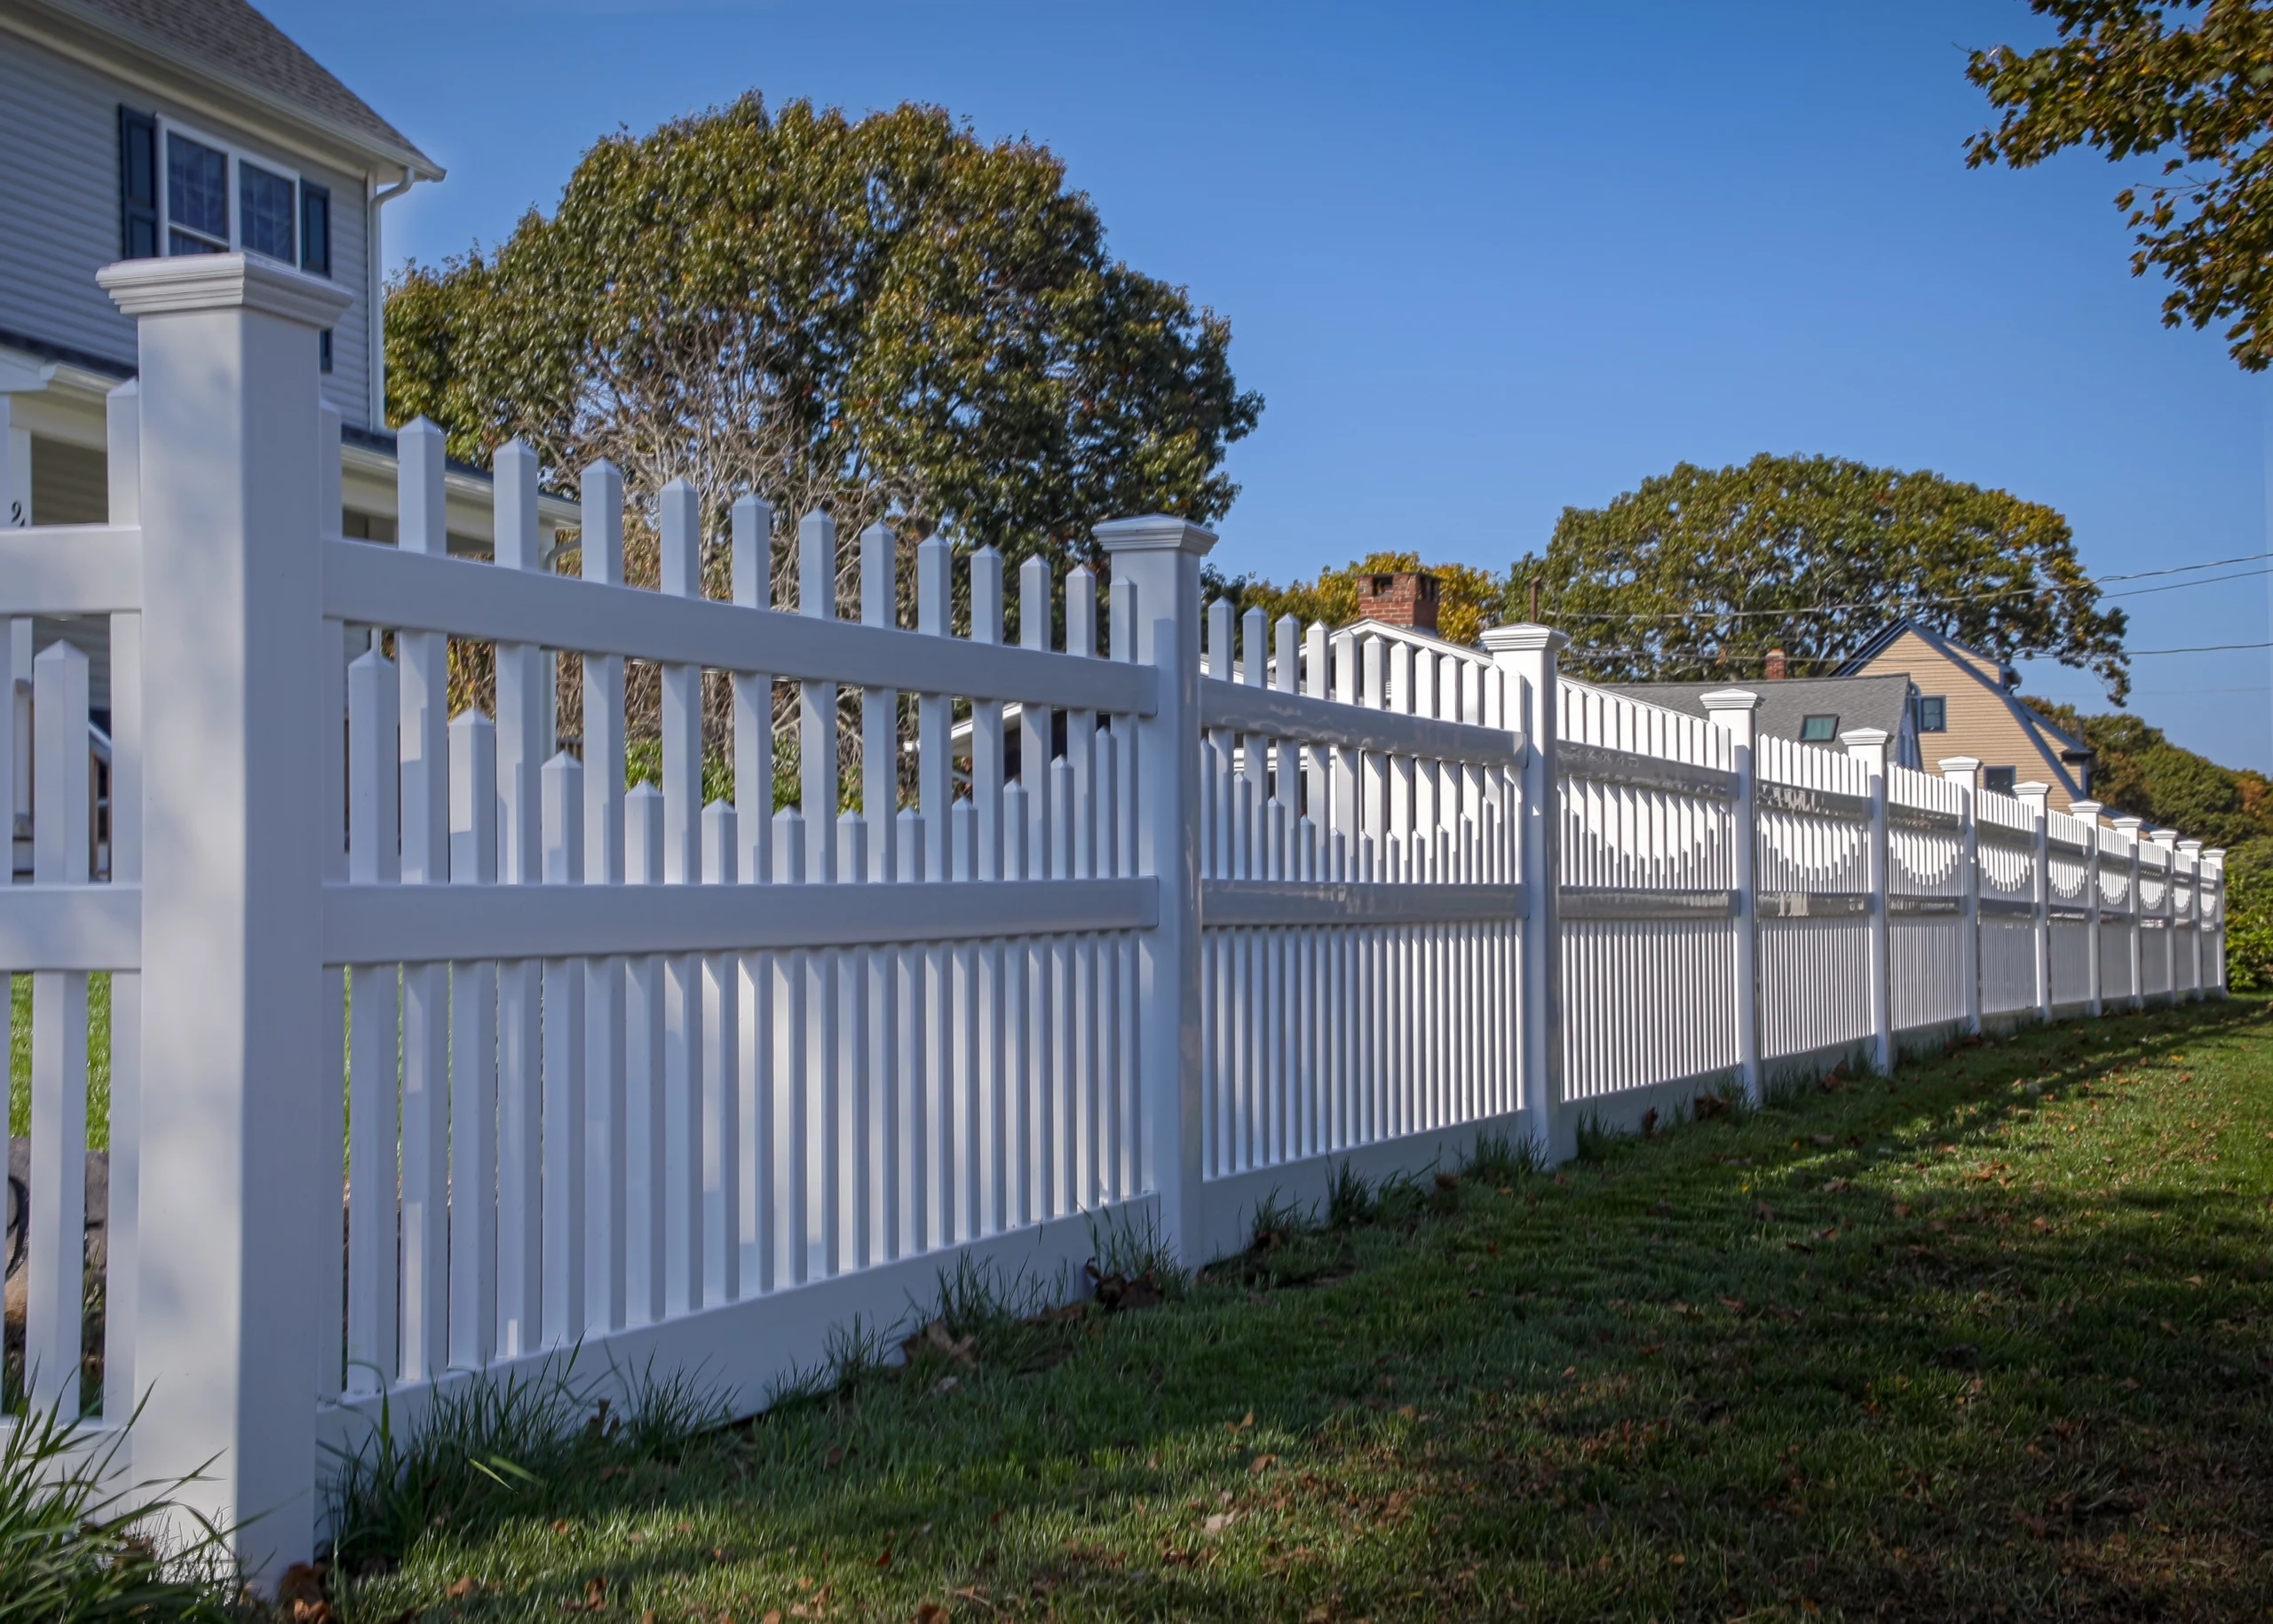 vinyl fence by Fence Pros Direct in Rhode Island